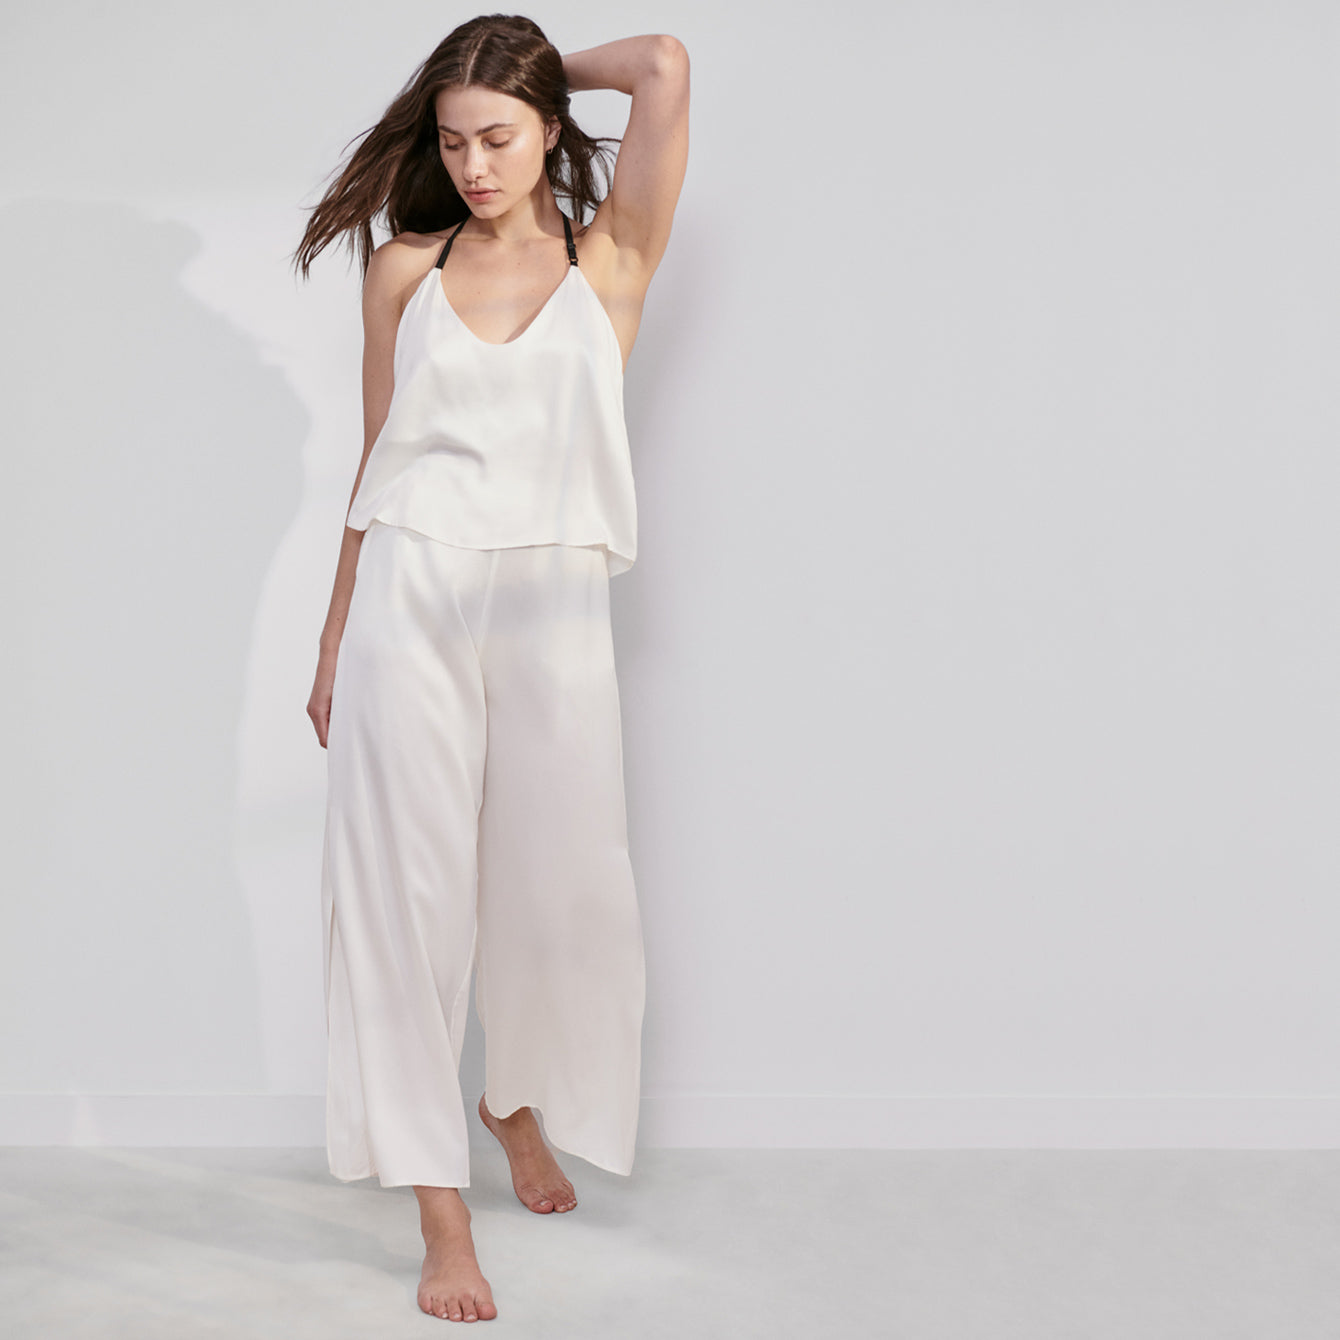 Washable Silk Cami Pant Set - Tranquil White/Immersed Black / L